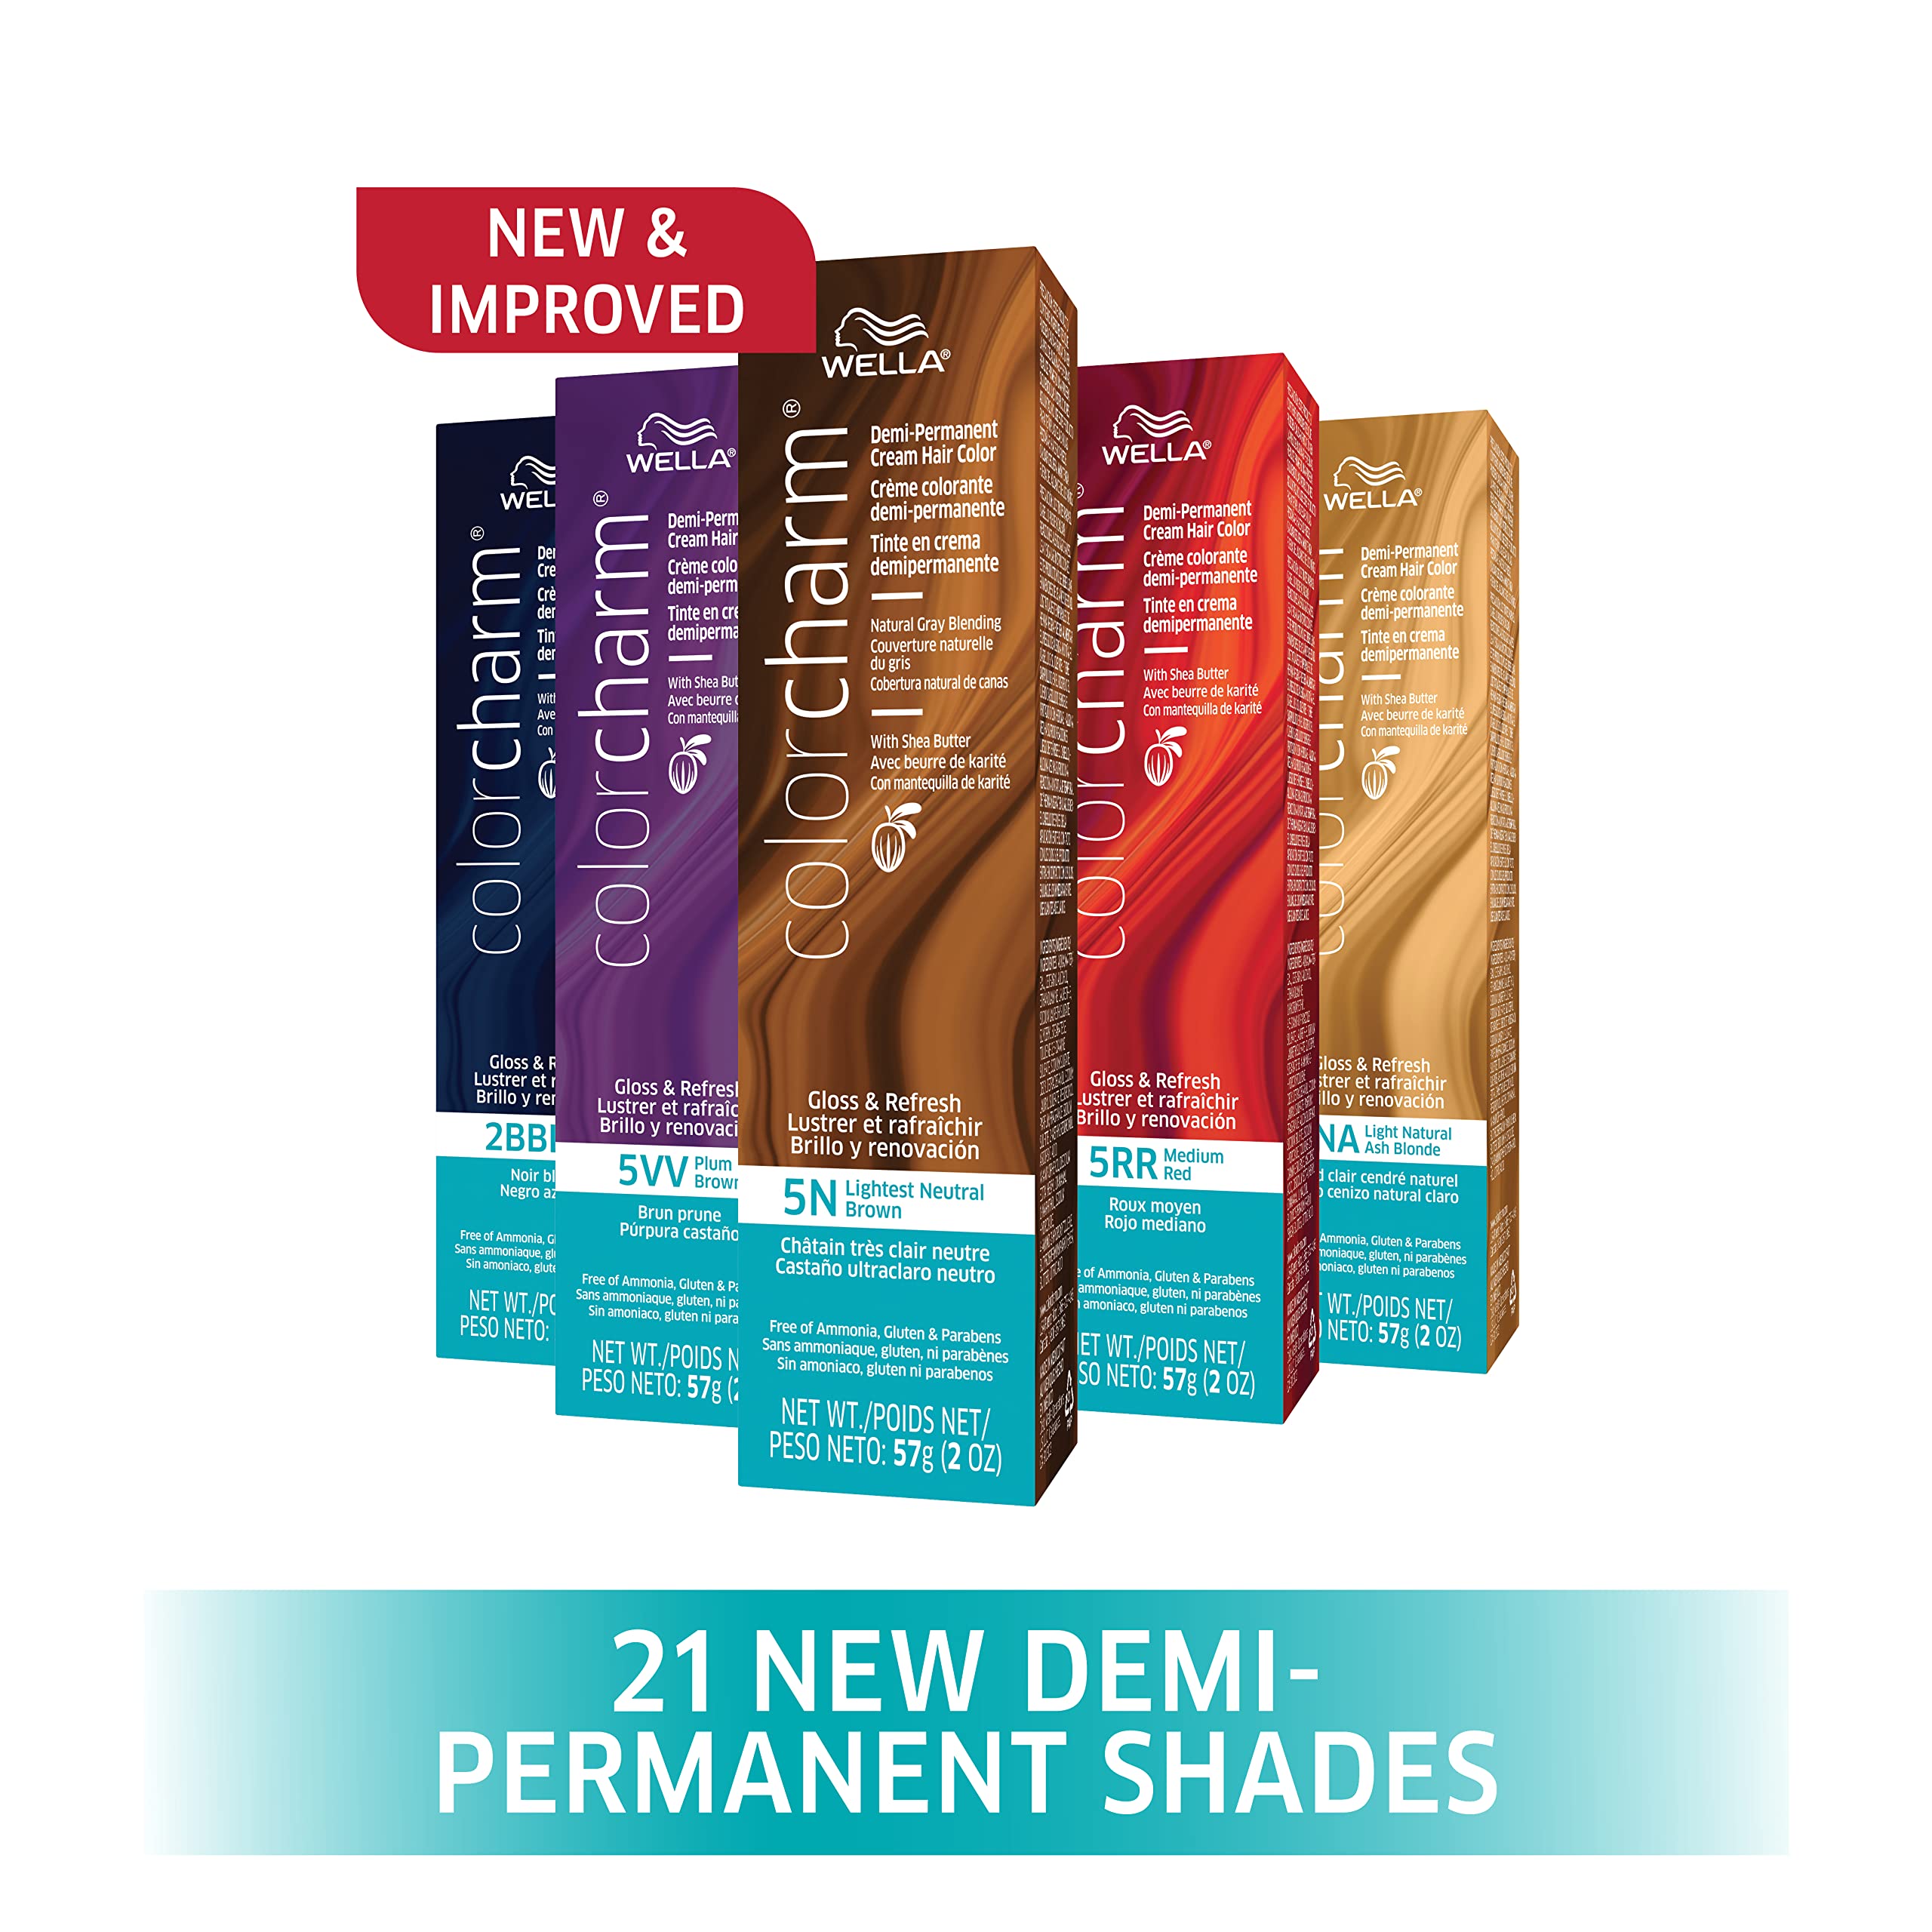 WELLA colorcharm Demi-Permanent Hair Color, Adds Gloss & Color Richness, Gray Coverage